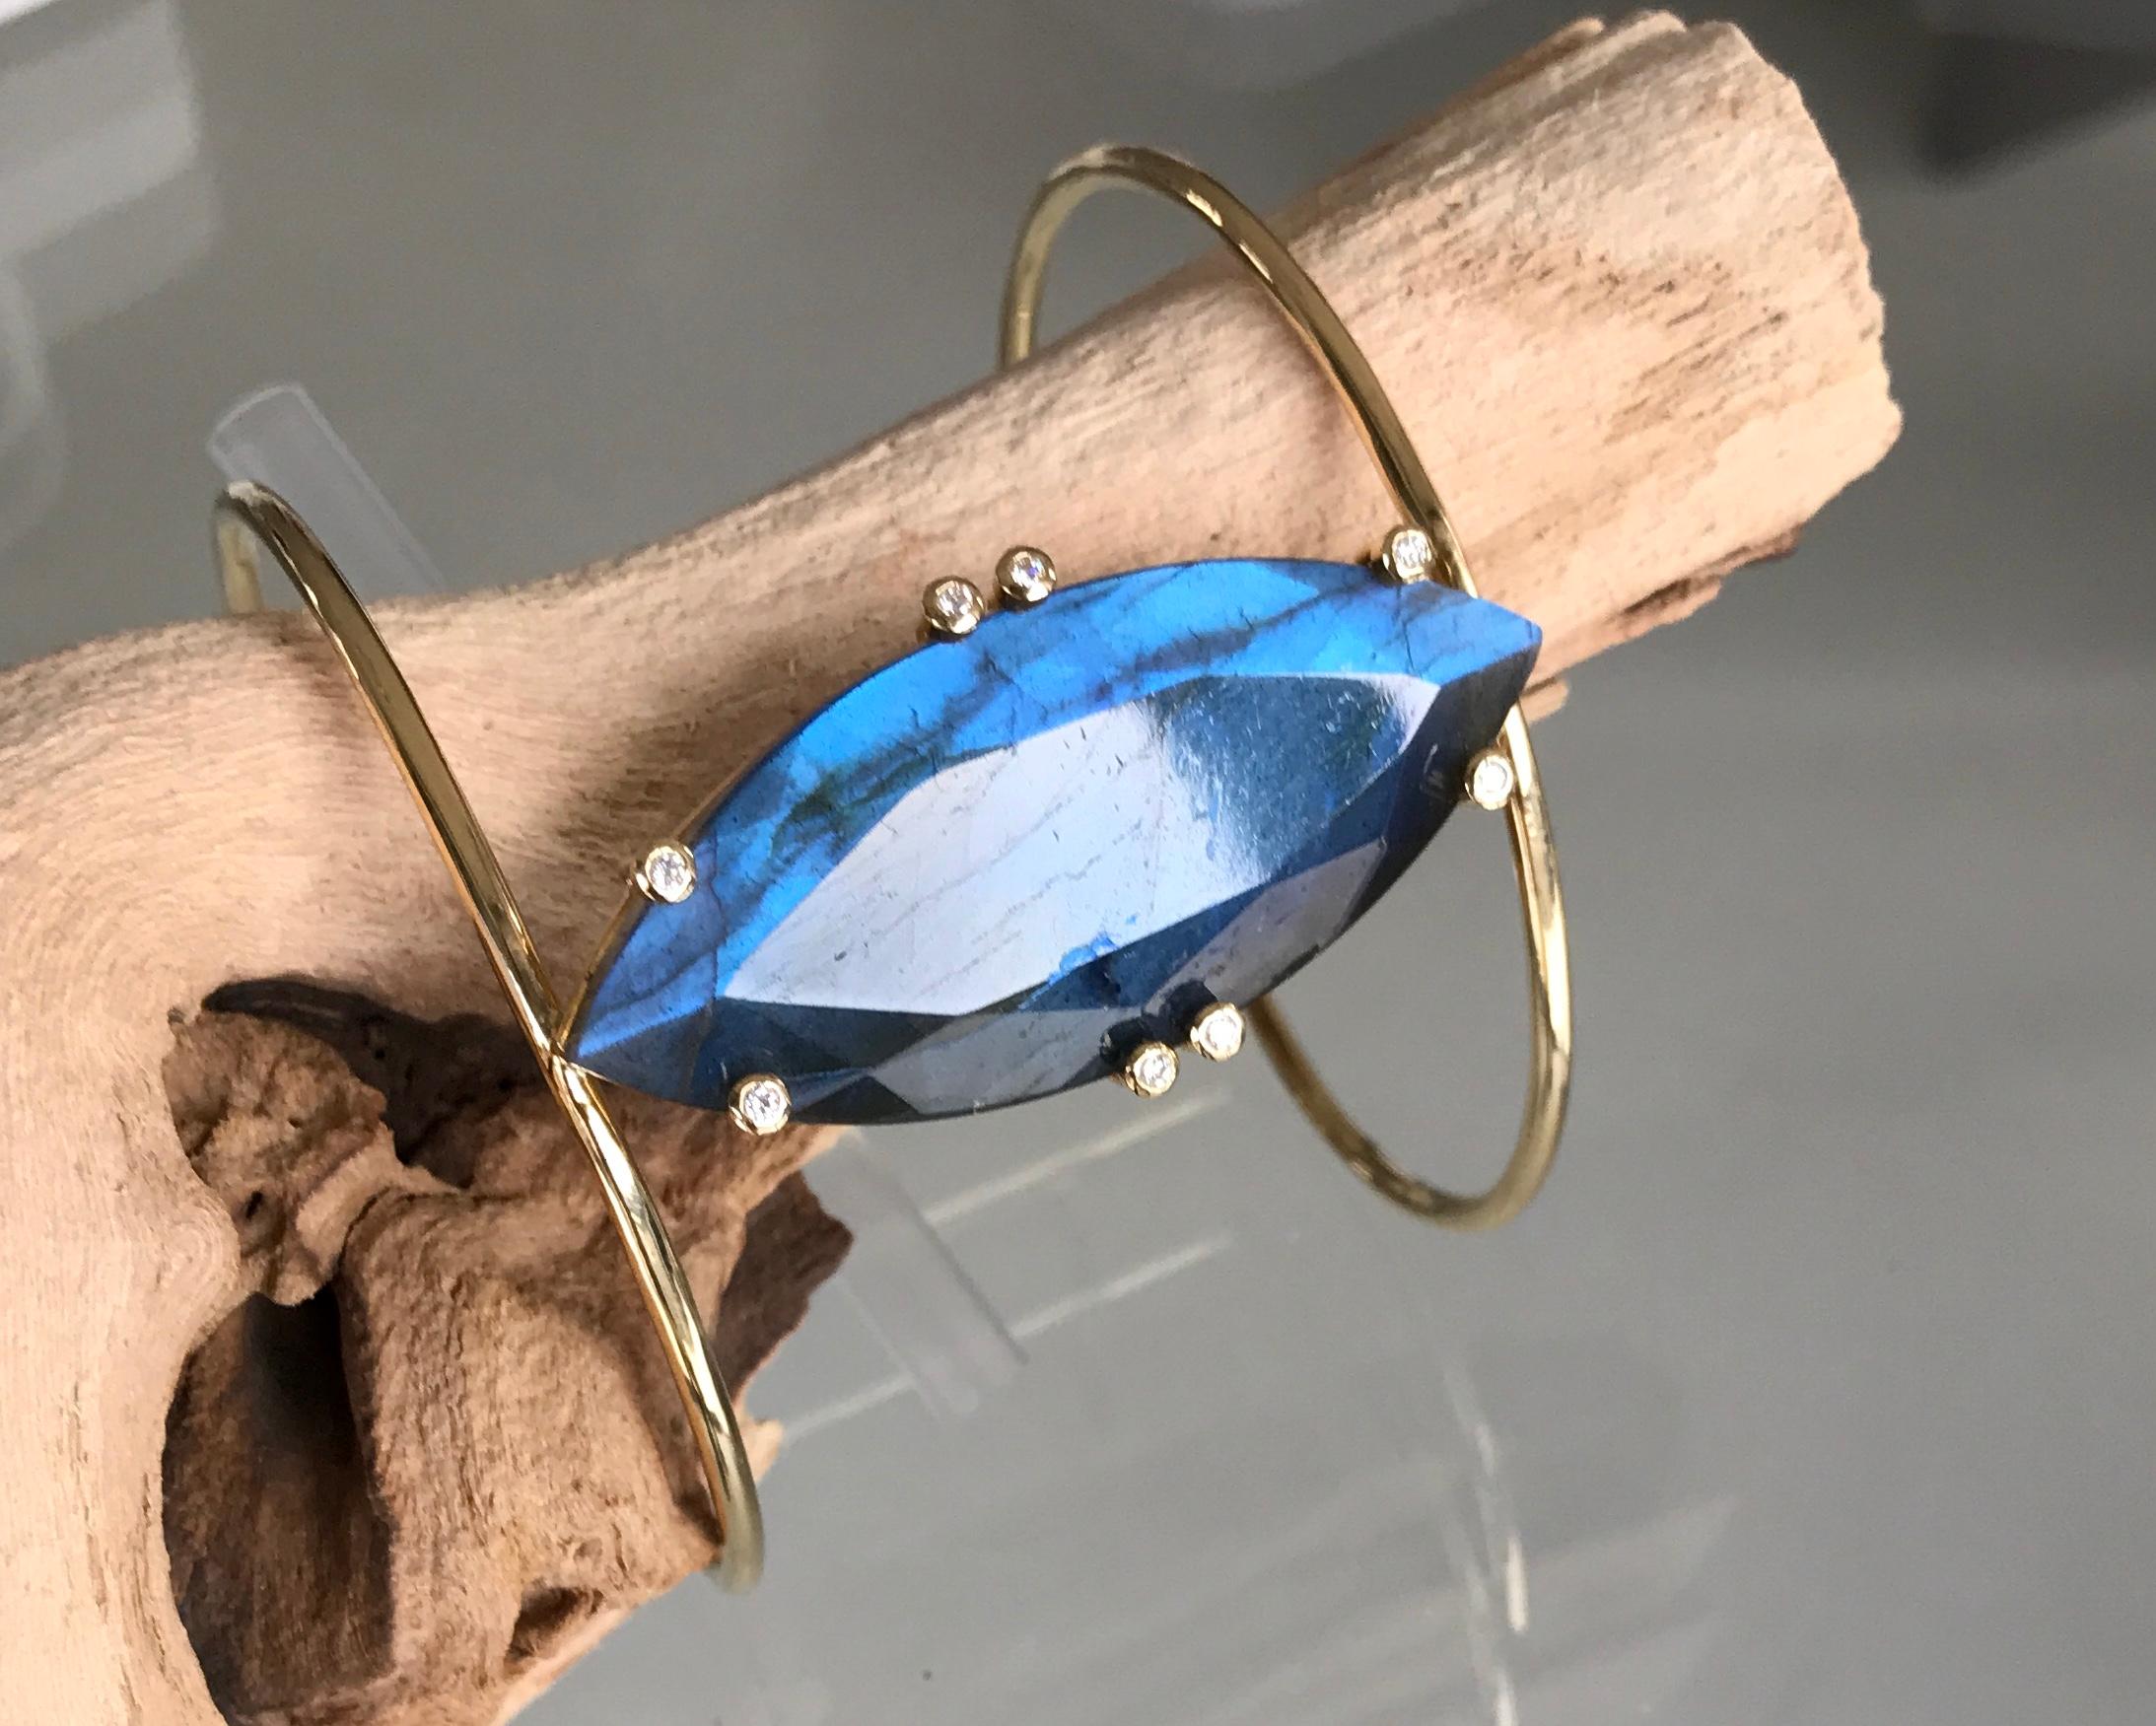 One-of-a-kind fancy marquise shaped Madagascar labradorite and diamond cuff bracelet. Handcrafted in 18 karat yellow gold. 

The amazing blue flash labradorite is the centerpiece of this stunning cuff bracelet. This magical gemstone radiates varying